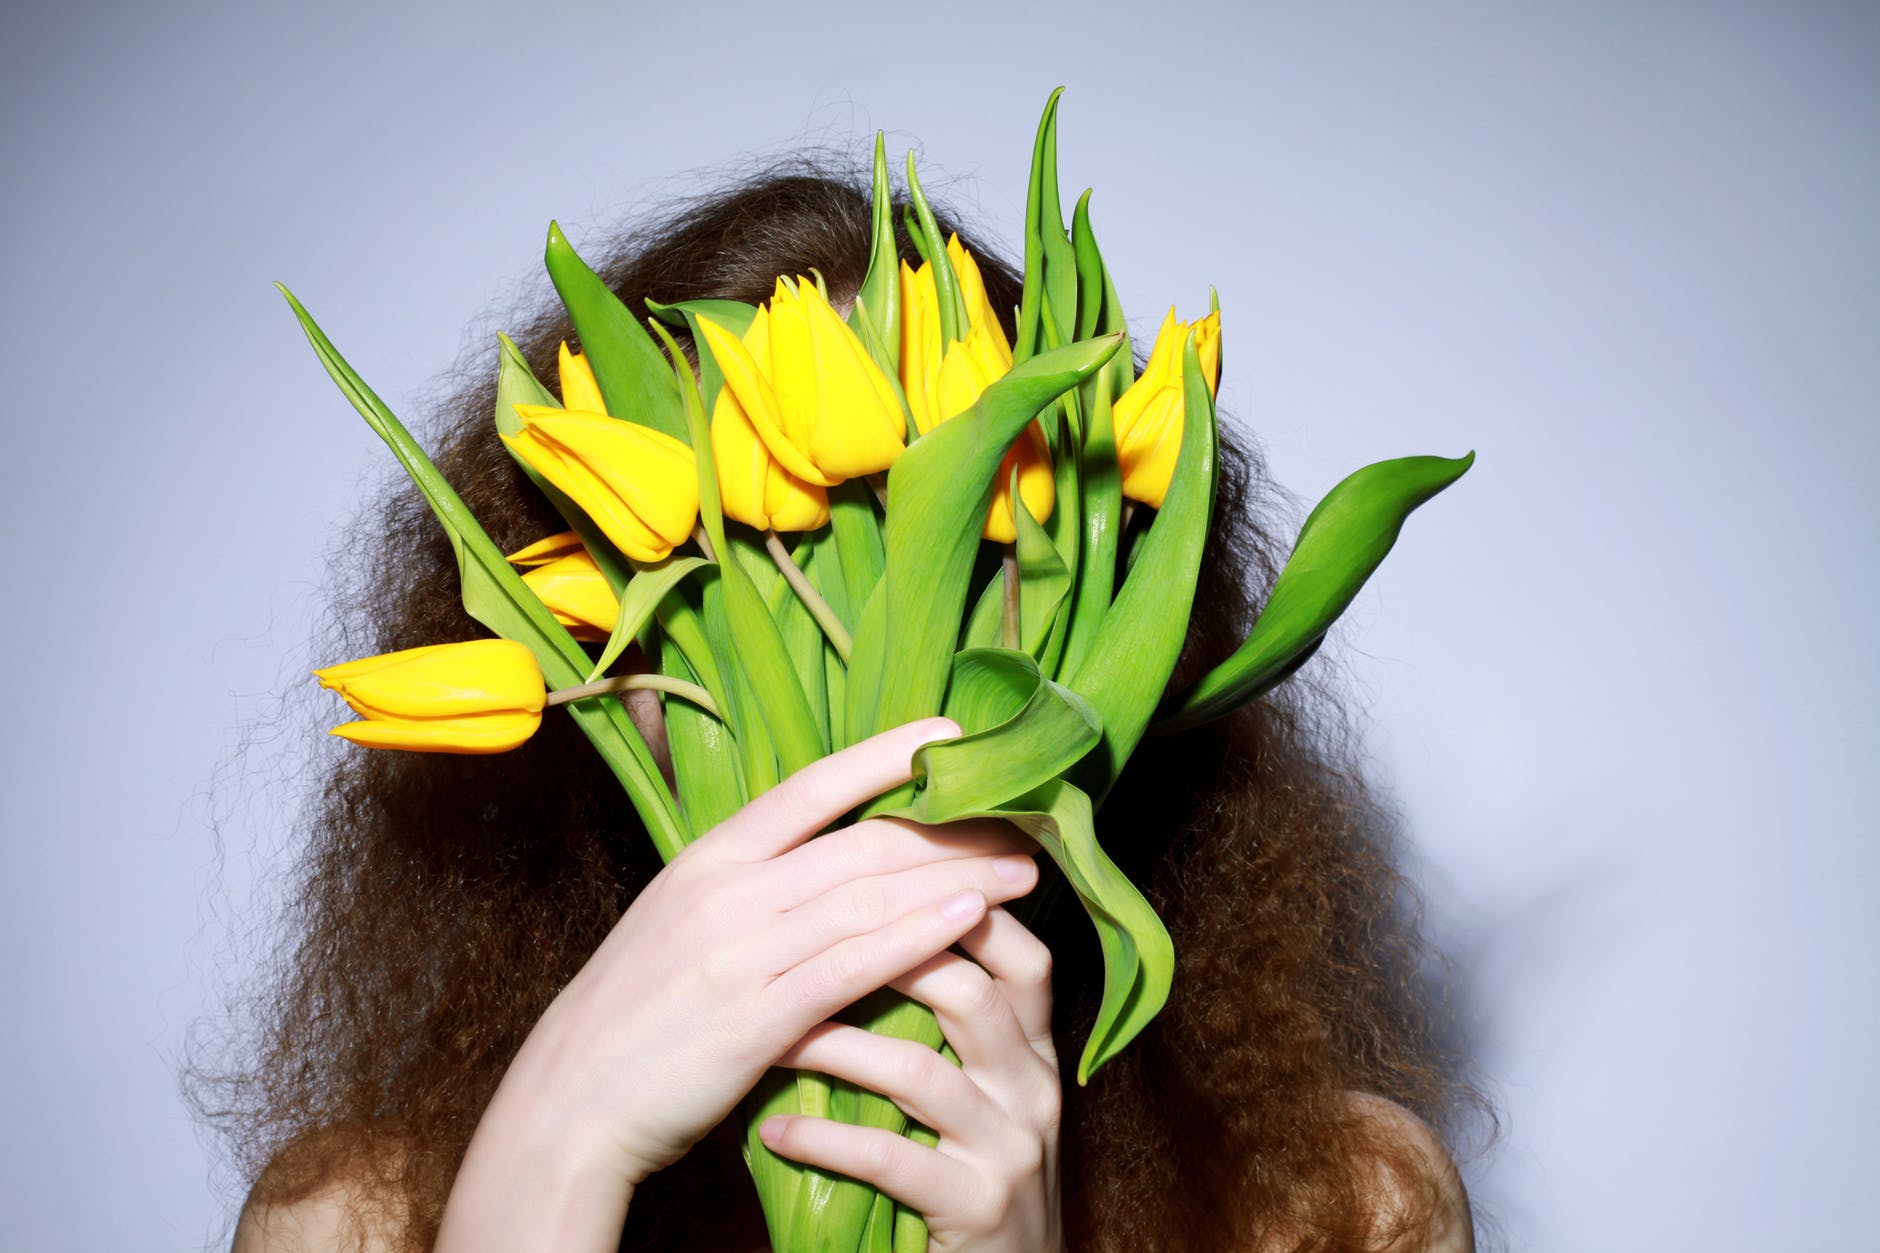 Person with long curly hair holding a bunch of yellow tulips in front of their face